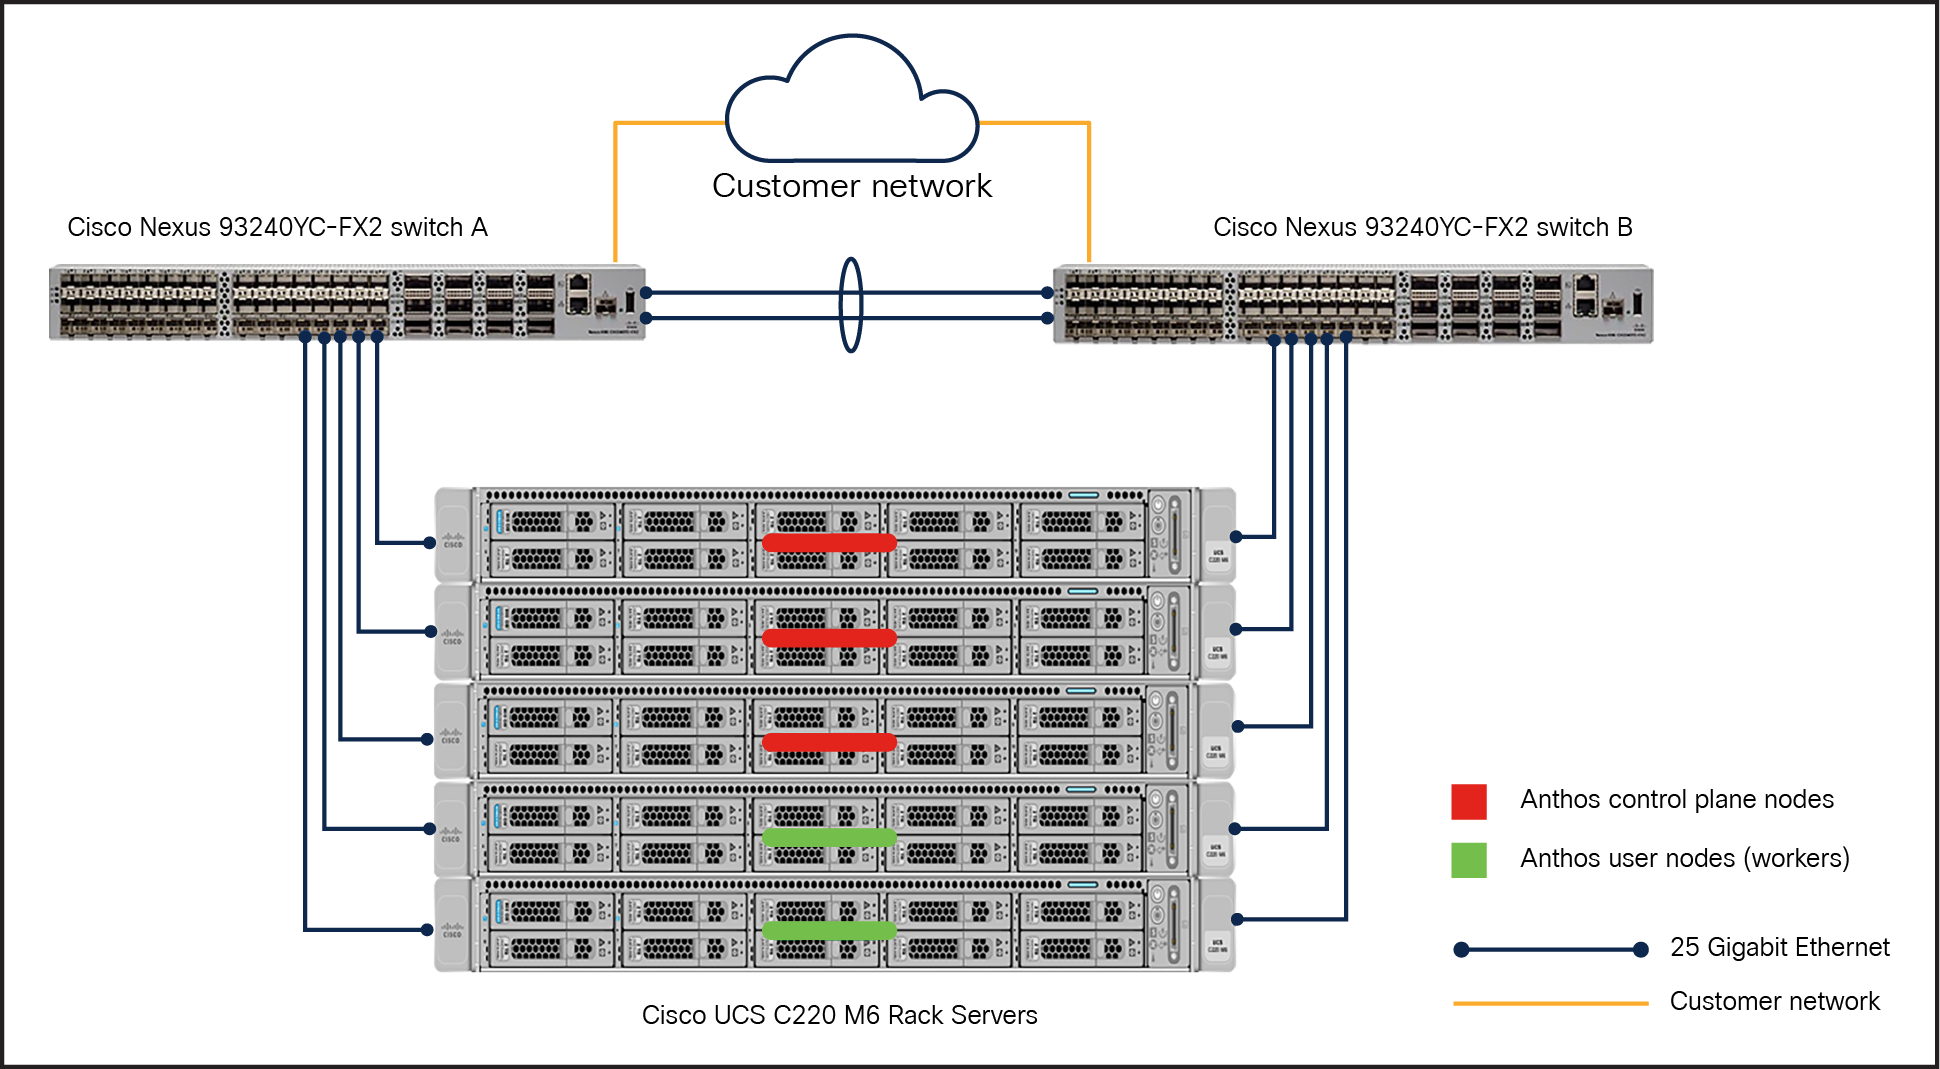 Reference architecture for Anthos bare metal in HA mode on Cisco UCS C240M6 Rack Servers